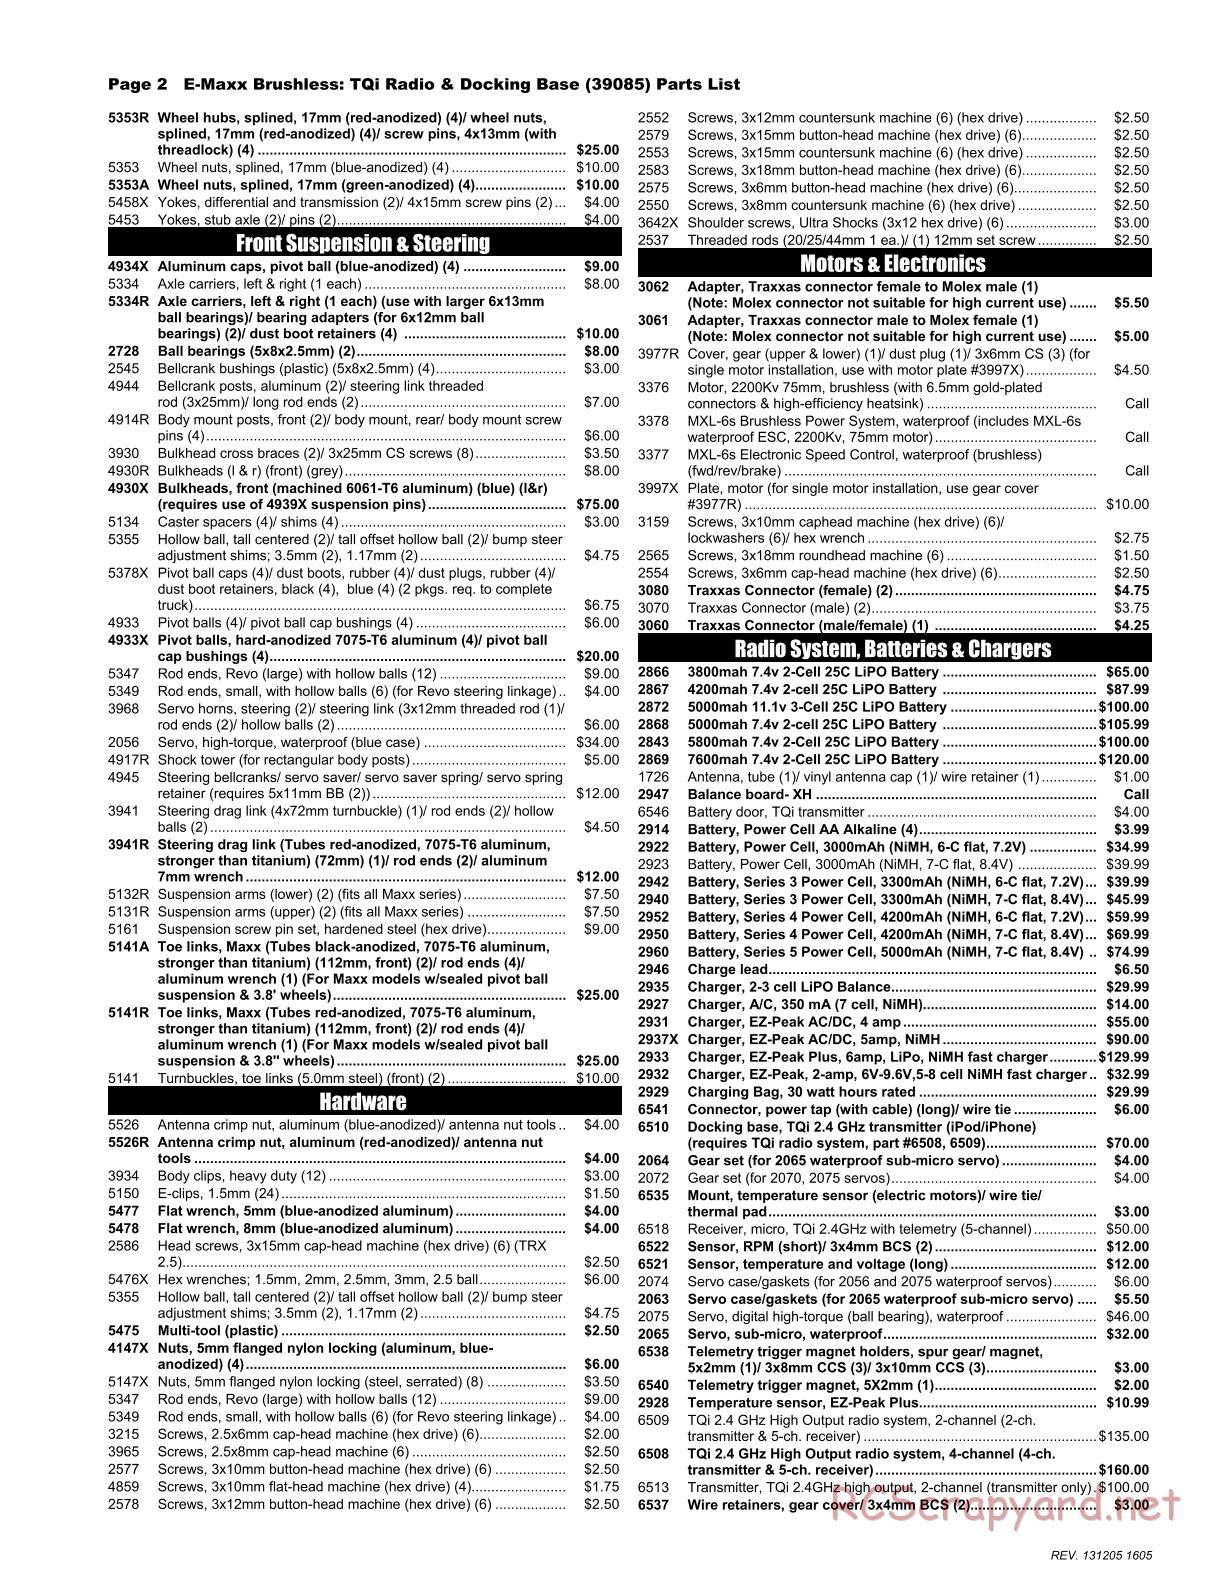 Traxxas - E-Maxx Brushless (2014) - Parts List - Page 2